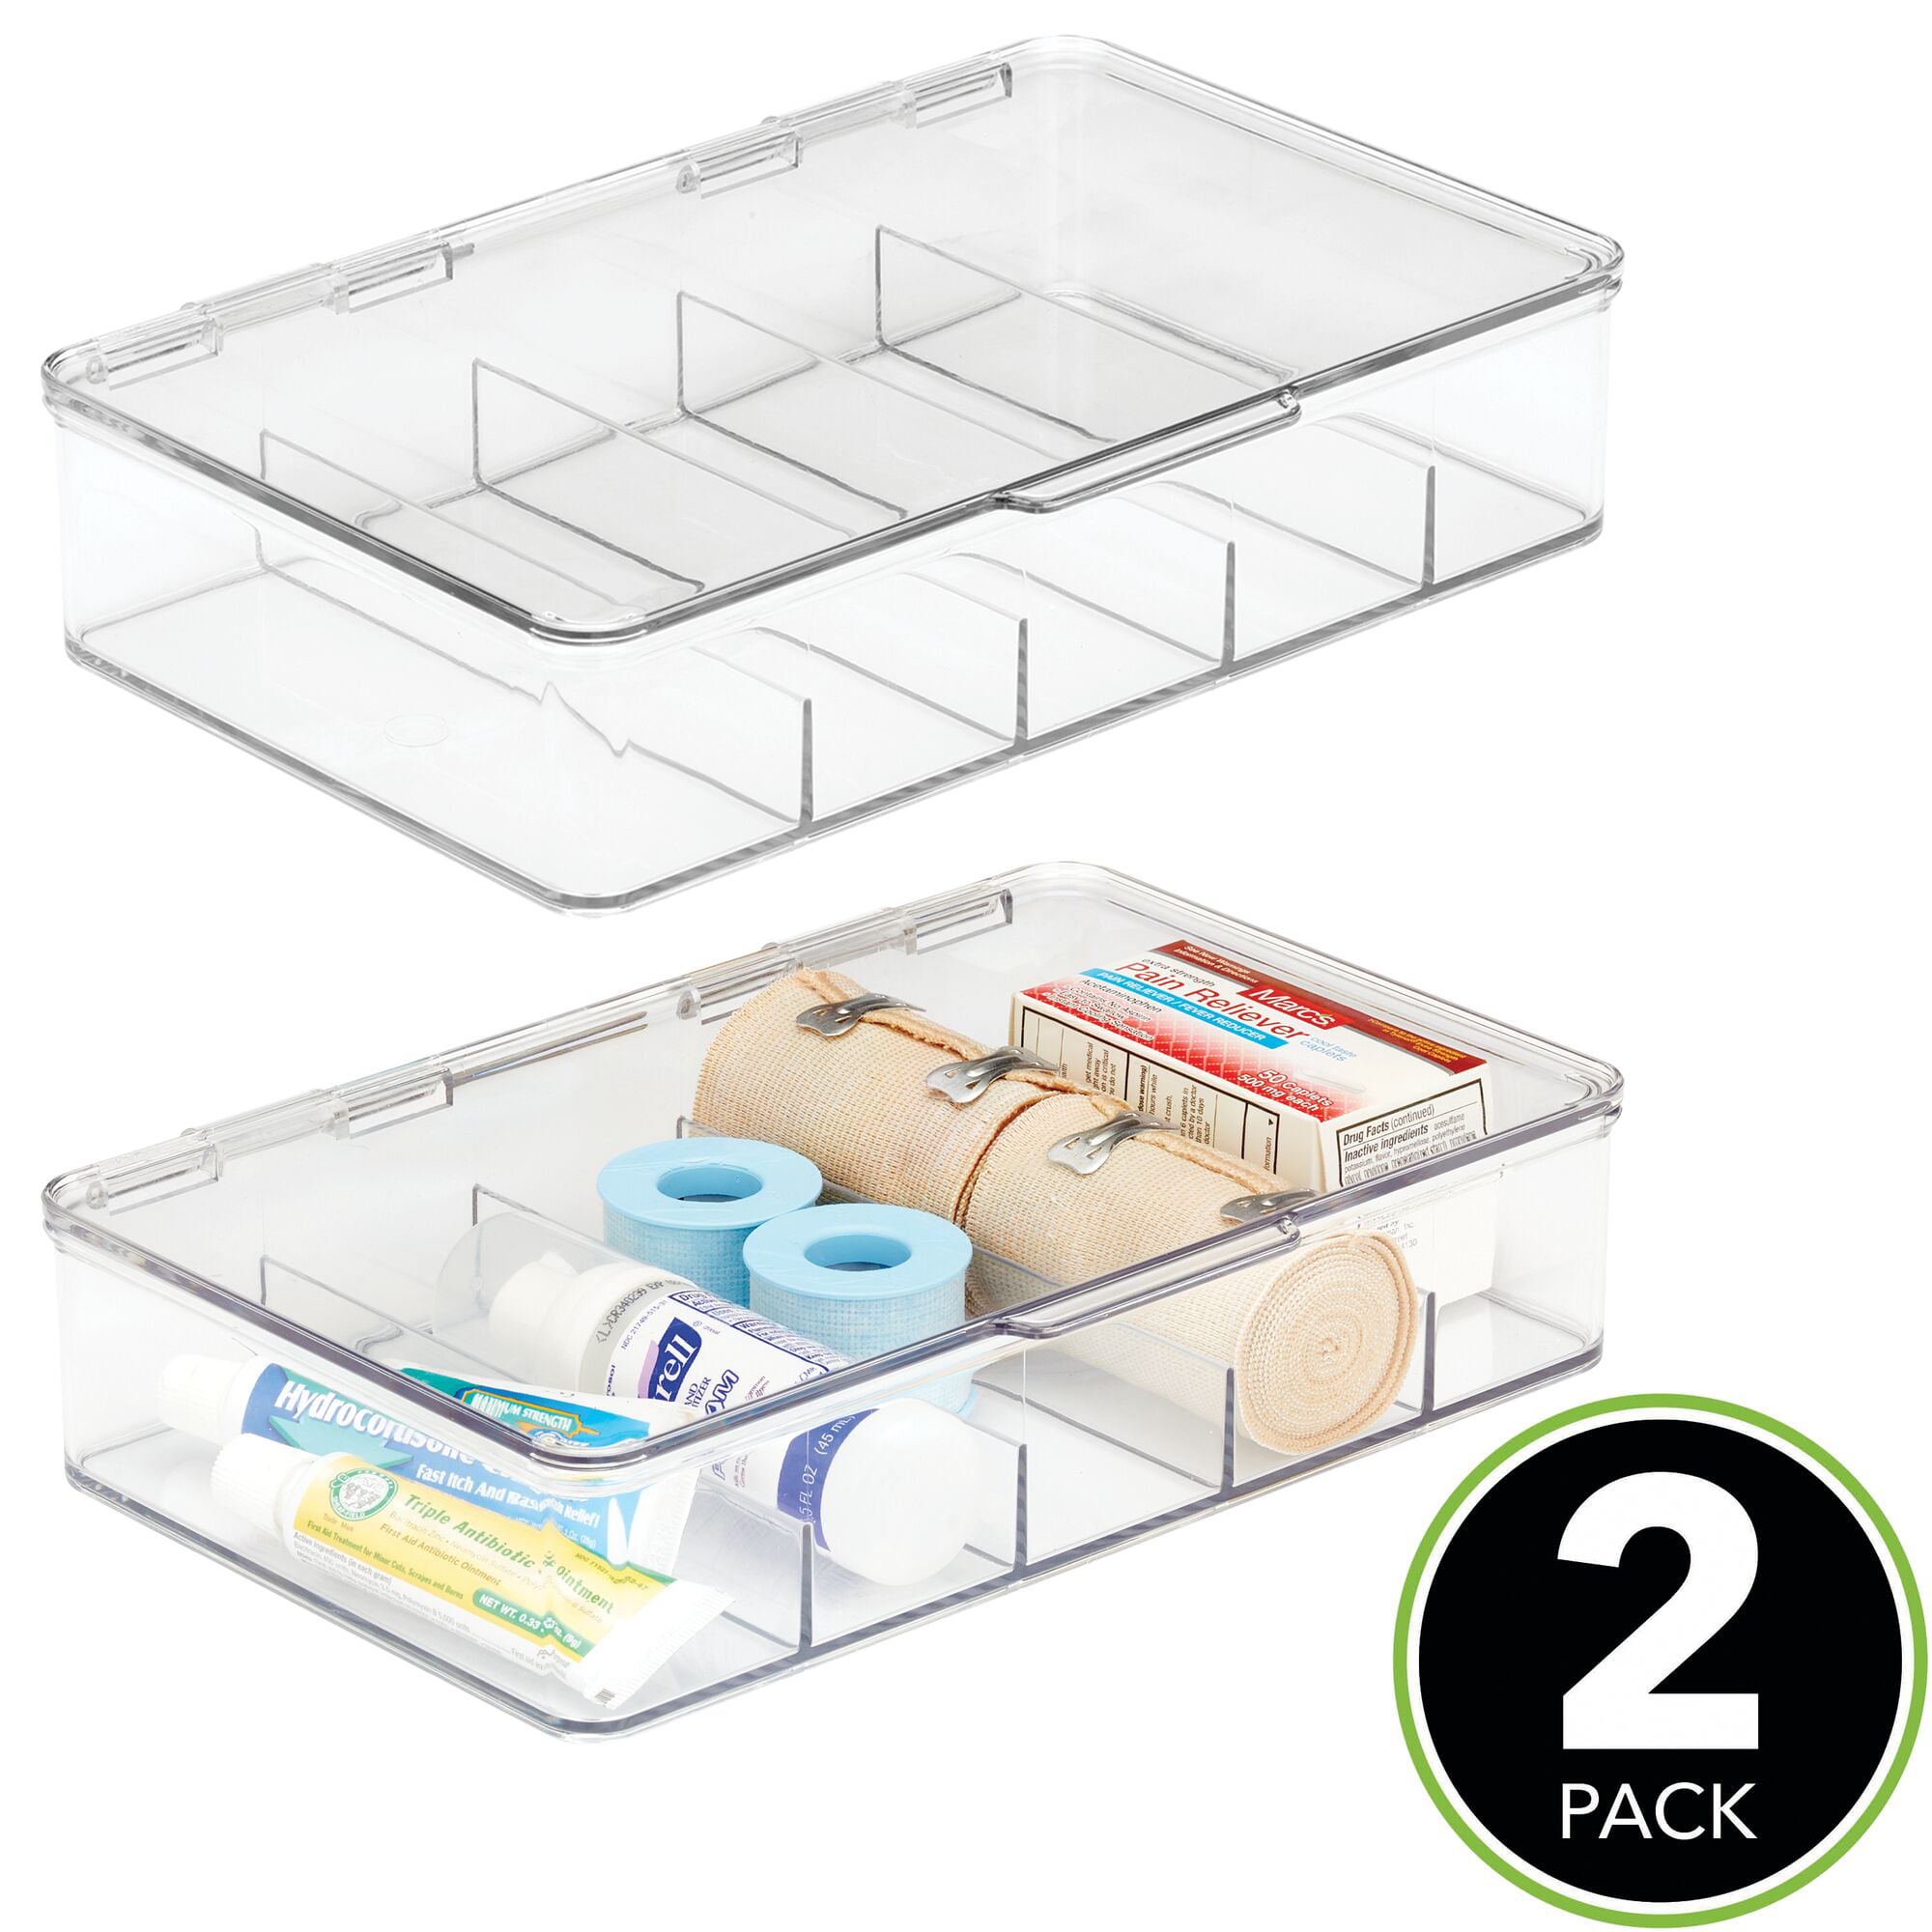 Helpful plastic band aid storage box for Treating Small Wounds 